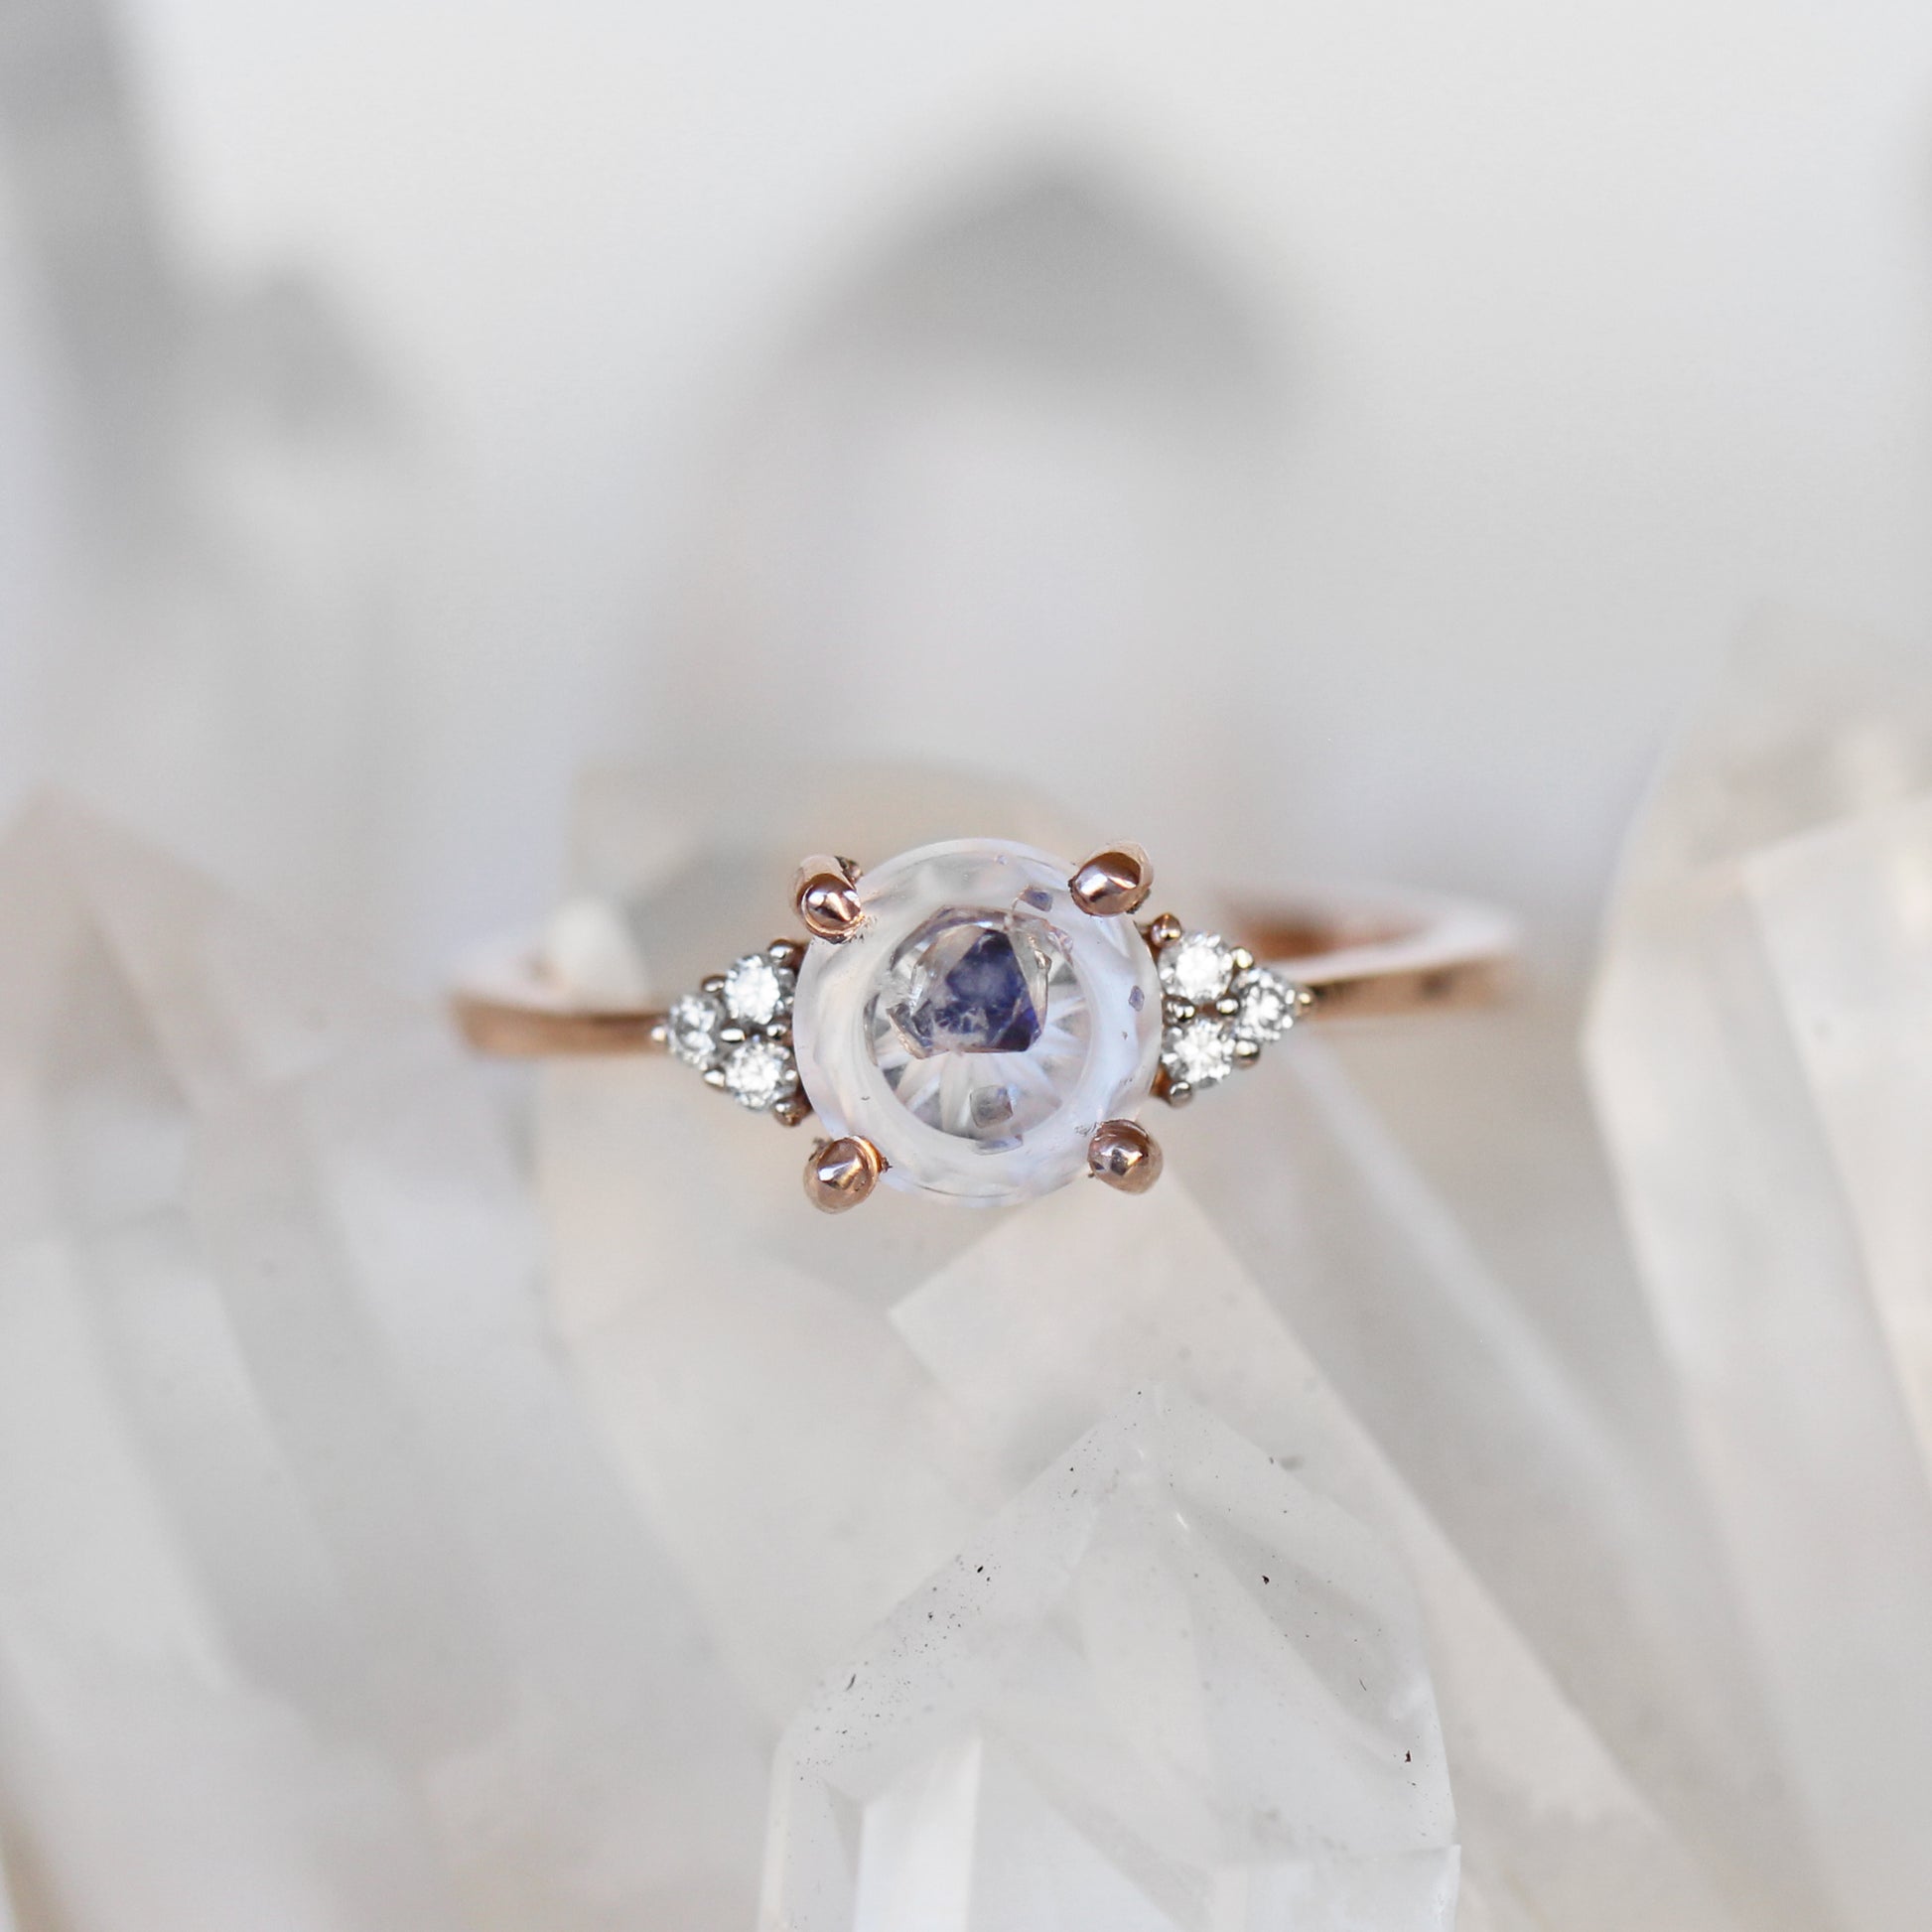 Imogene Ring with a 1.3 ct Fluorite Quartz in 14k Rose Gold - Ready to Size and Ship - Midwinter Co. Alternative Bridal Rings and Modern Fine Jewelry